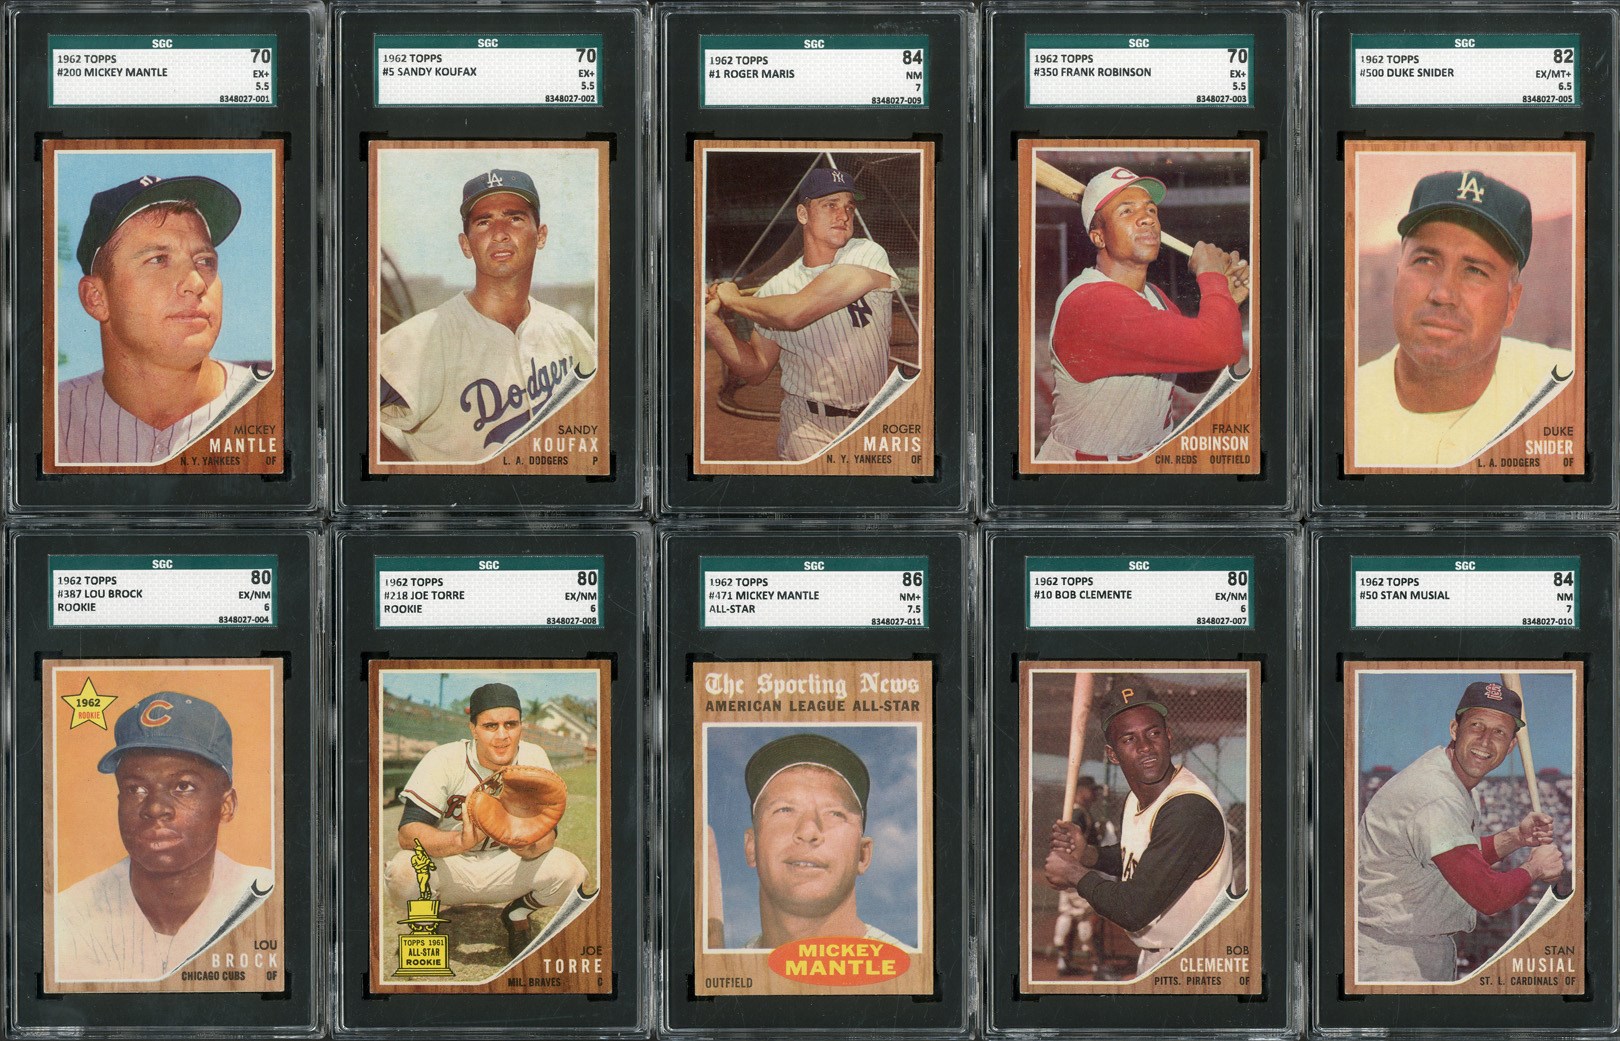 Baseball and Trading Cards - 1962 Topps Complete Set of 598 Cards (11 SGC Graded)